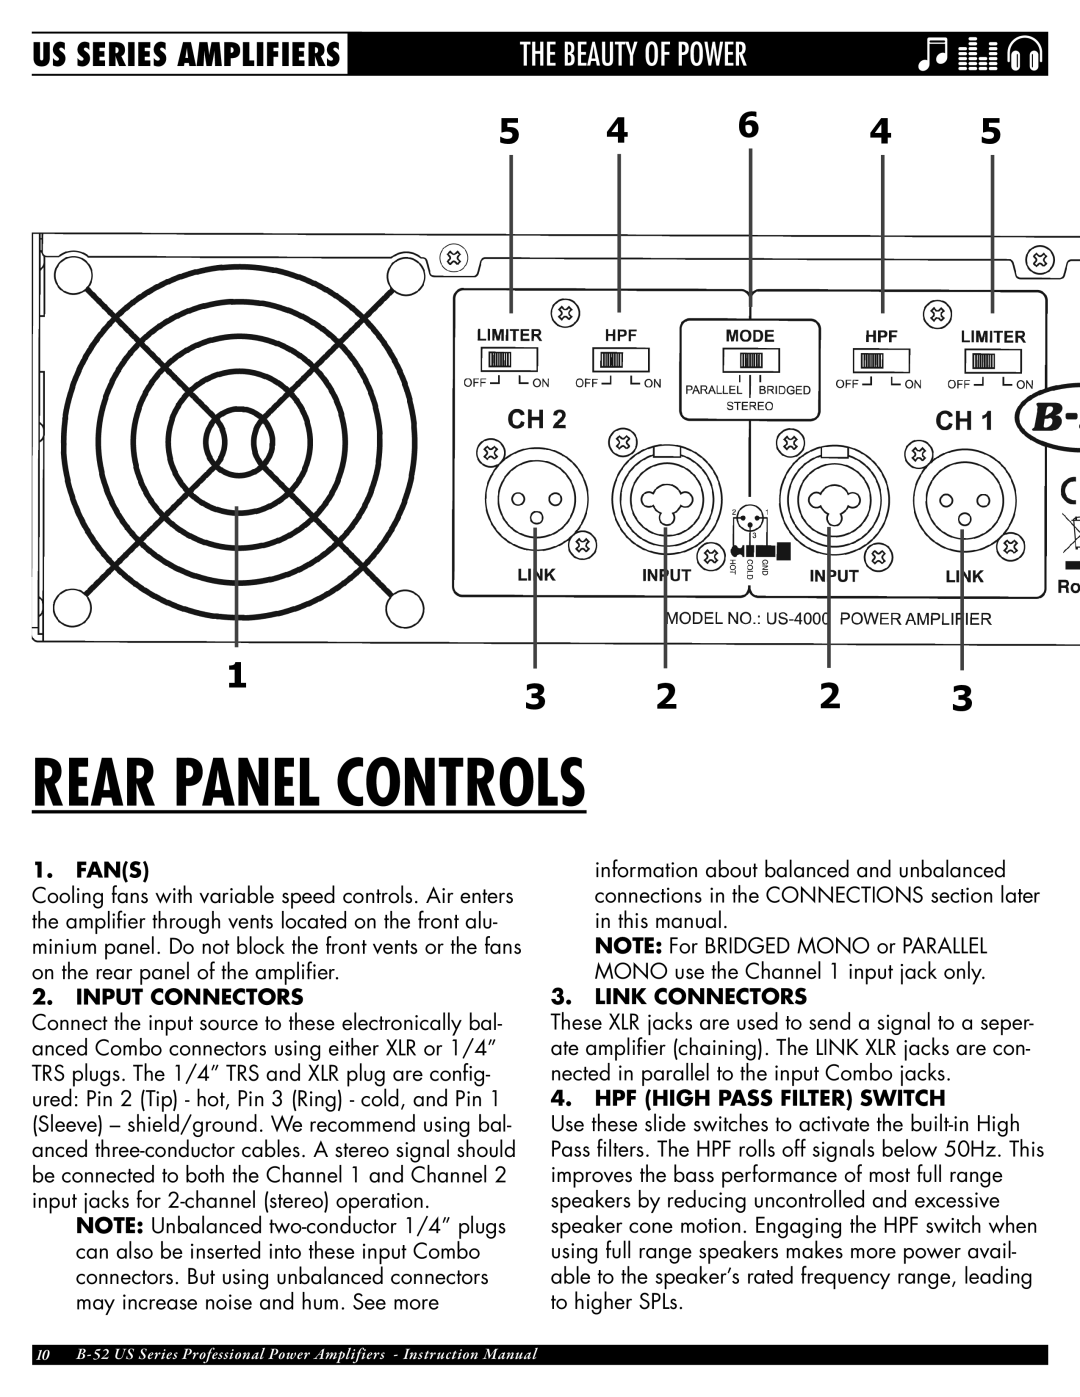 ETI Sound Systems, INC US-1200 Rear Panel Controls, FanS, Input connectors, Link connectors, HPF High Pass Filter switch 